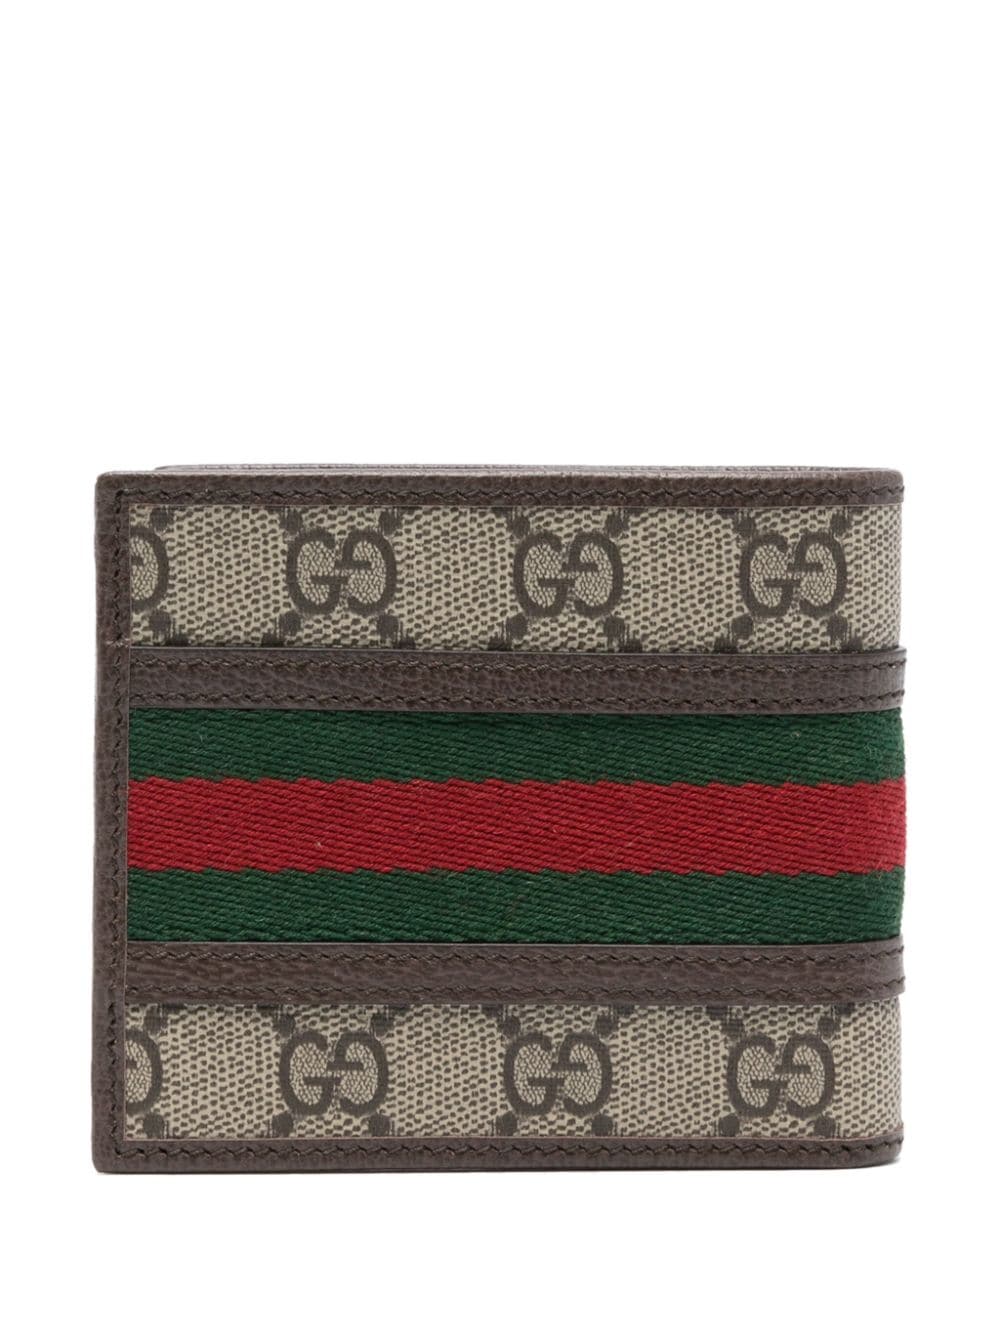 Image 2 of Gucci Ophidia GG bi-fold wallet